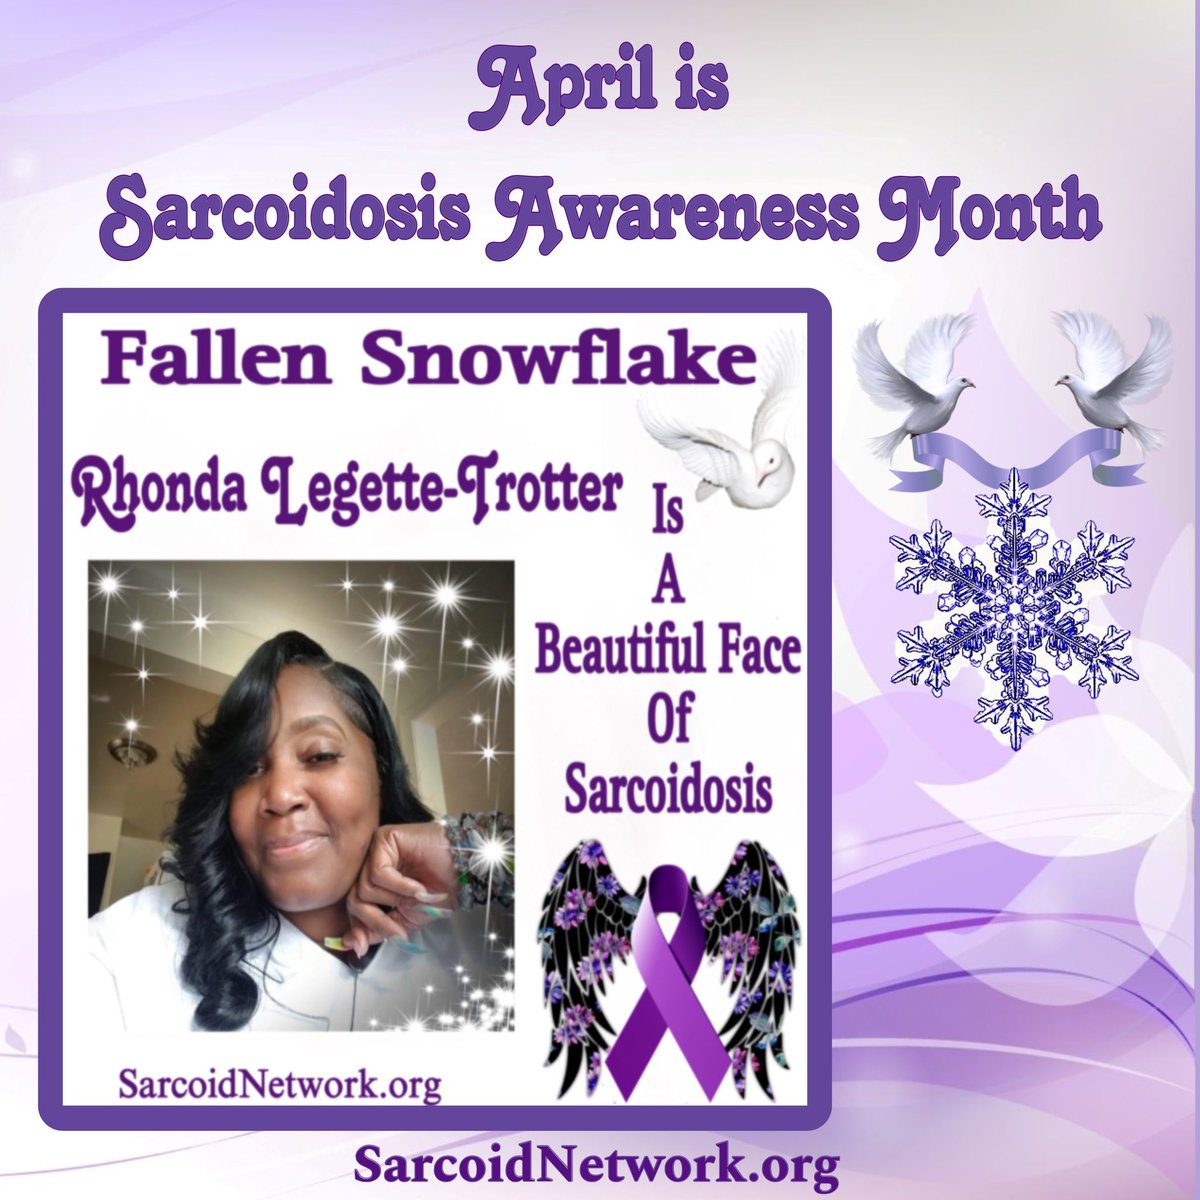 This is our Sarcoidosis Sister Fallen Snowflake Rhonda Legette-Trotter and she is a Beautiful Face of Sarcoidosis.💜

#Sarcoidosis #raredisease #preciousmemories #patientadvocate #sarcoidosisadvocate #beautifulfacesofsarcoidosis #sarcoidosisawarenessmonth